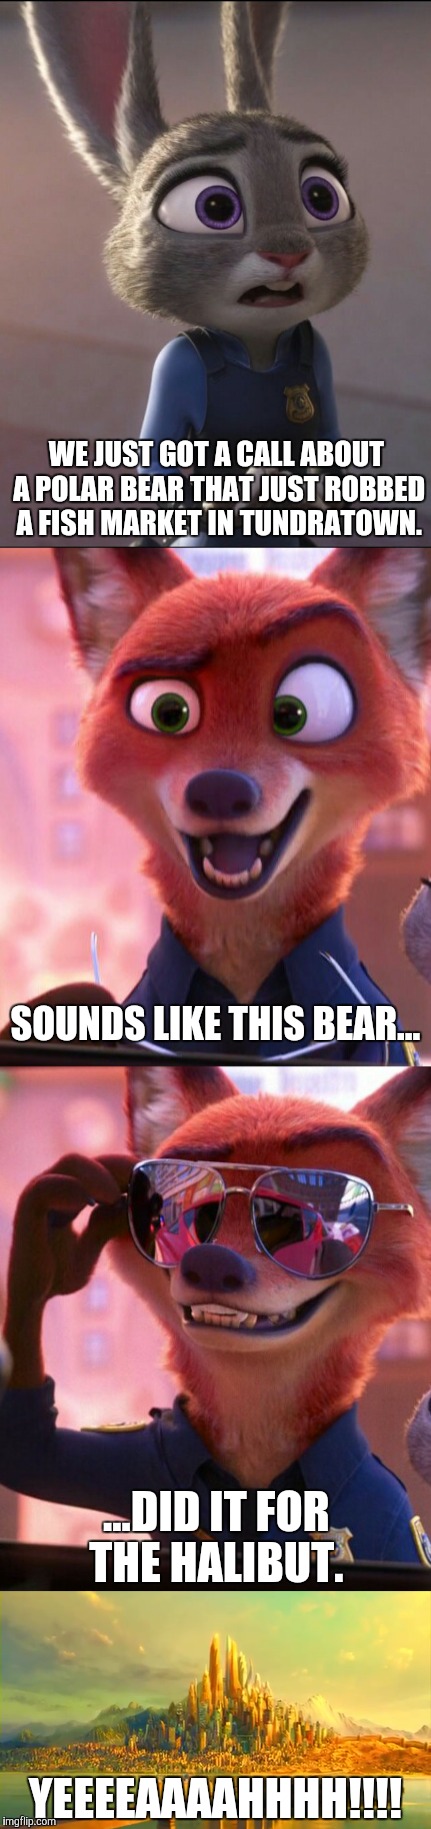 CSI: Zootopia 6 | WE JUST GOT A CALL ABOUT A POLAR BEAR THAT JUST ROBBED A FISH MARKET IN TUNDRATOWN. SOUNDS LIKE THIS BEAR... ...DID IT FOR THE HALIBUT. YEEEEAAAAHHHH!!!! | image tagged in zootopia,judy hopps,nick wilde,parody,funny,memes | made w/ Imgflip meme maker